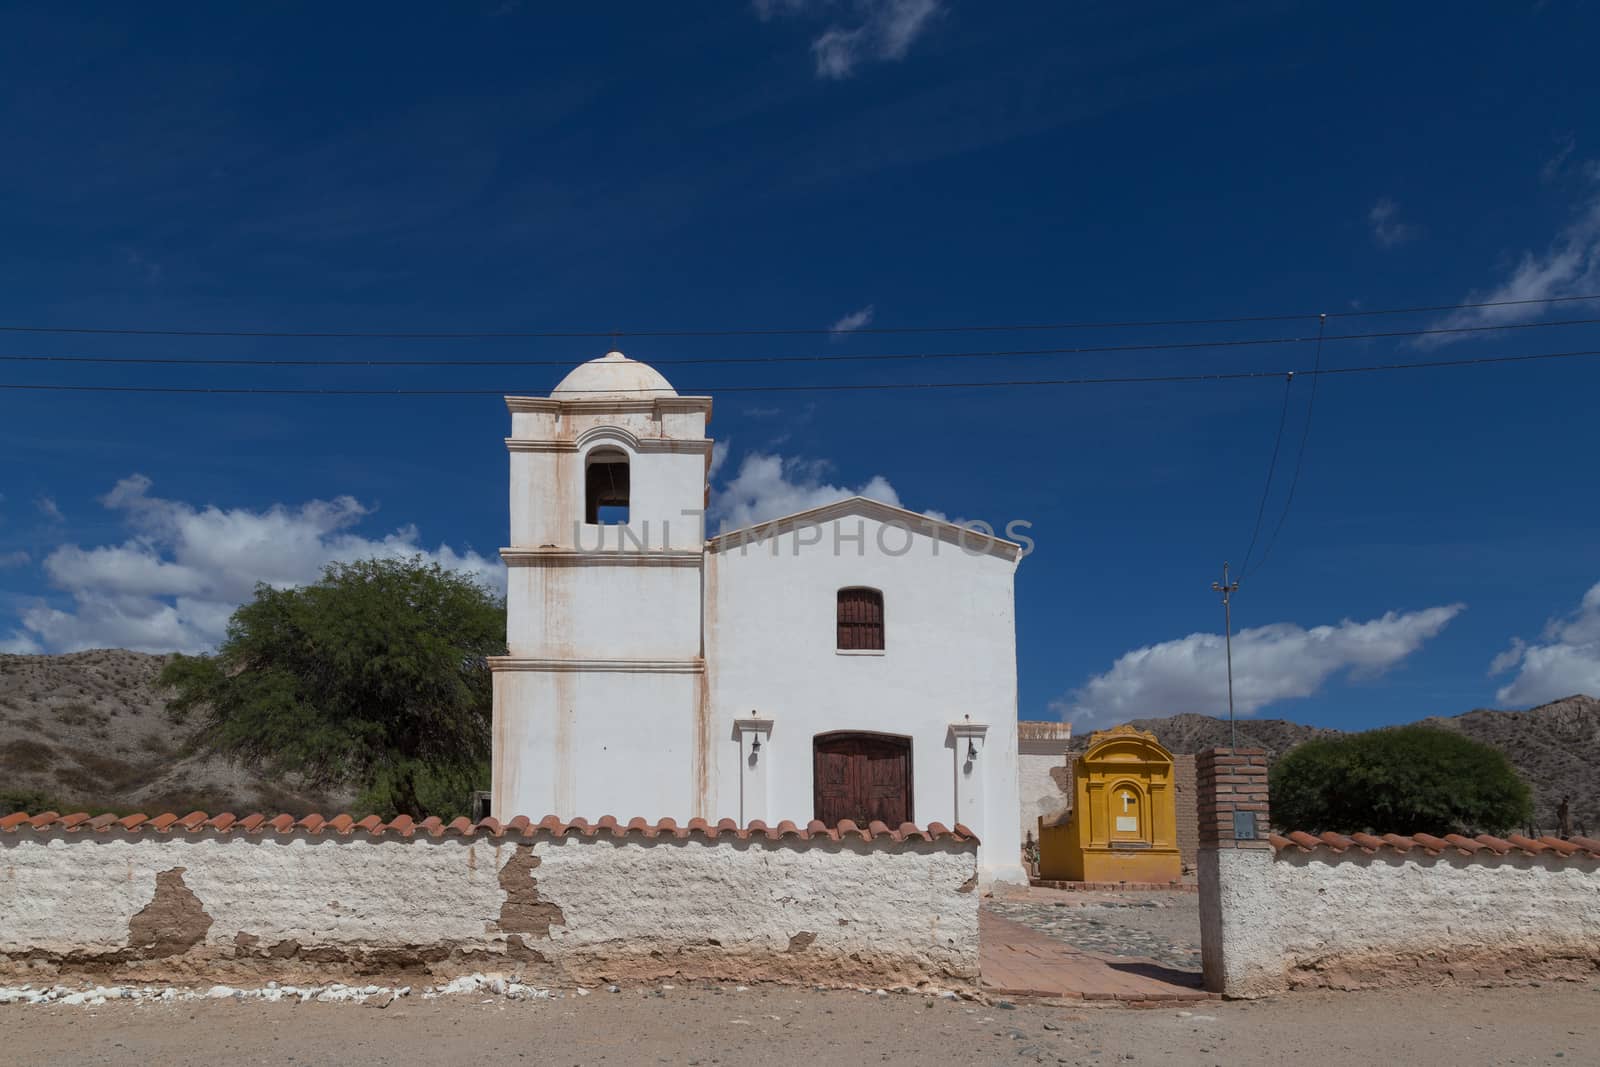 Photograph of a small church on route 40 in the Northwest of Argentina.